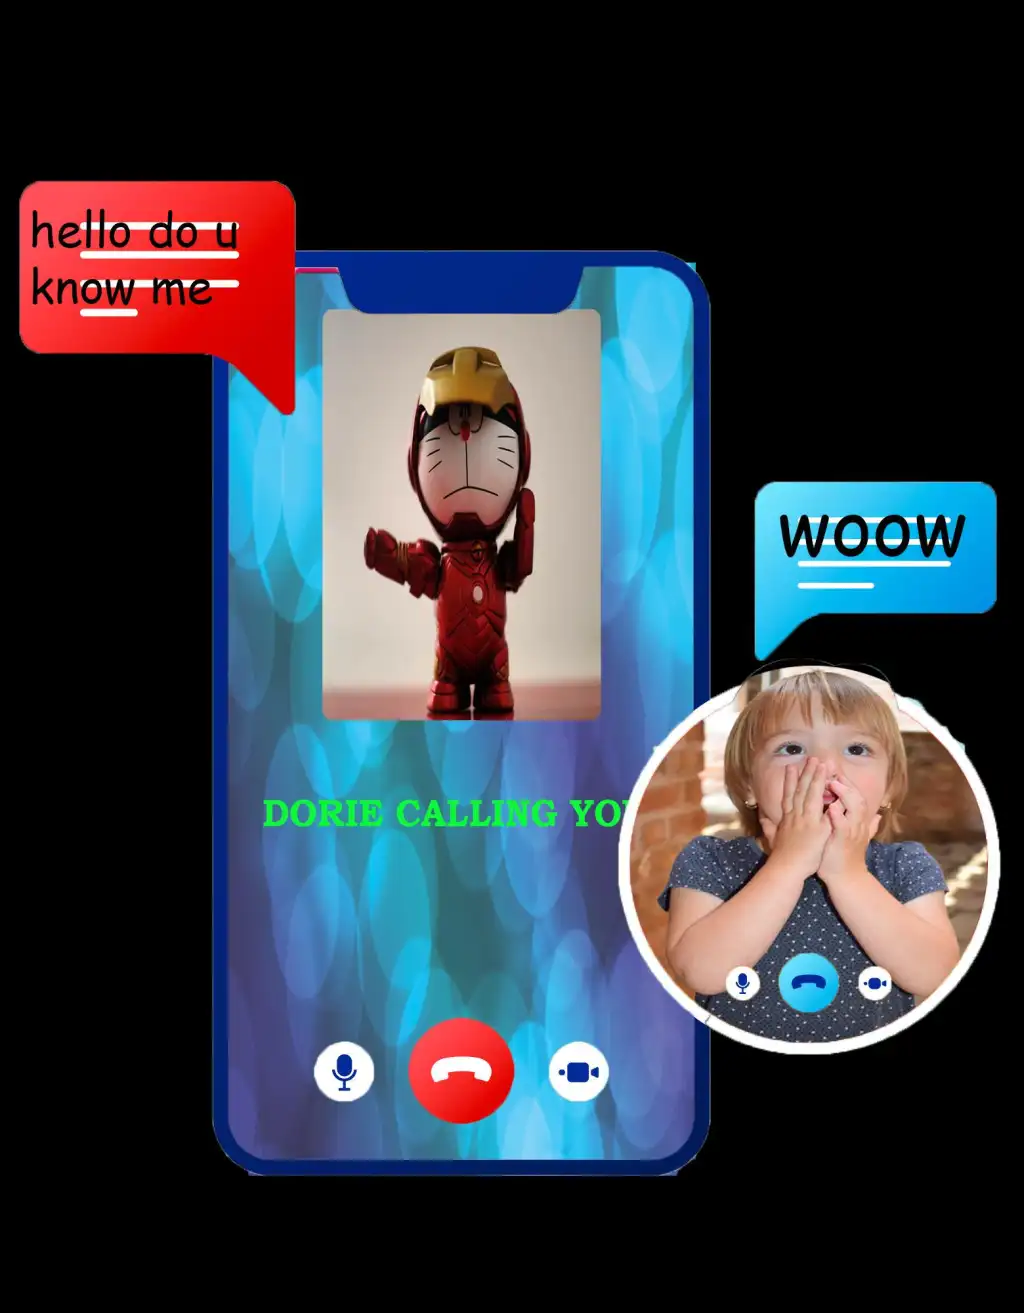 Hd Mon Faking Video - Dorie mon fake Video Call simulator App Ù„Ù€ Android Download - 9Apps